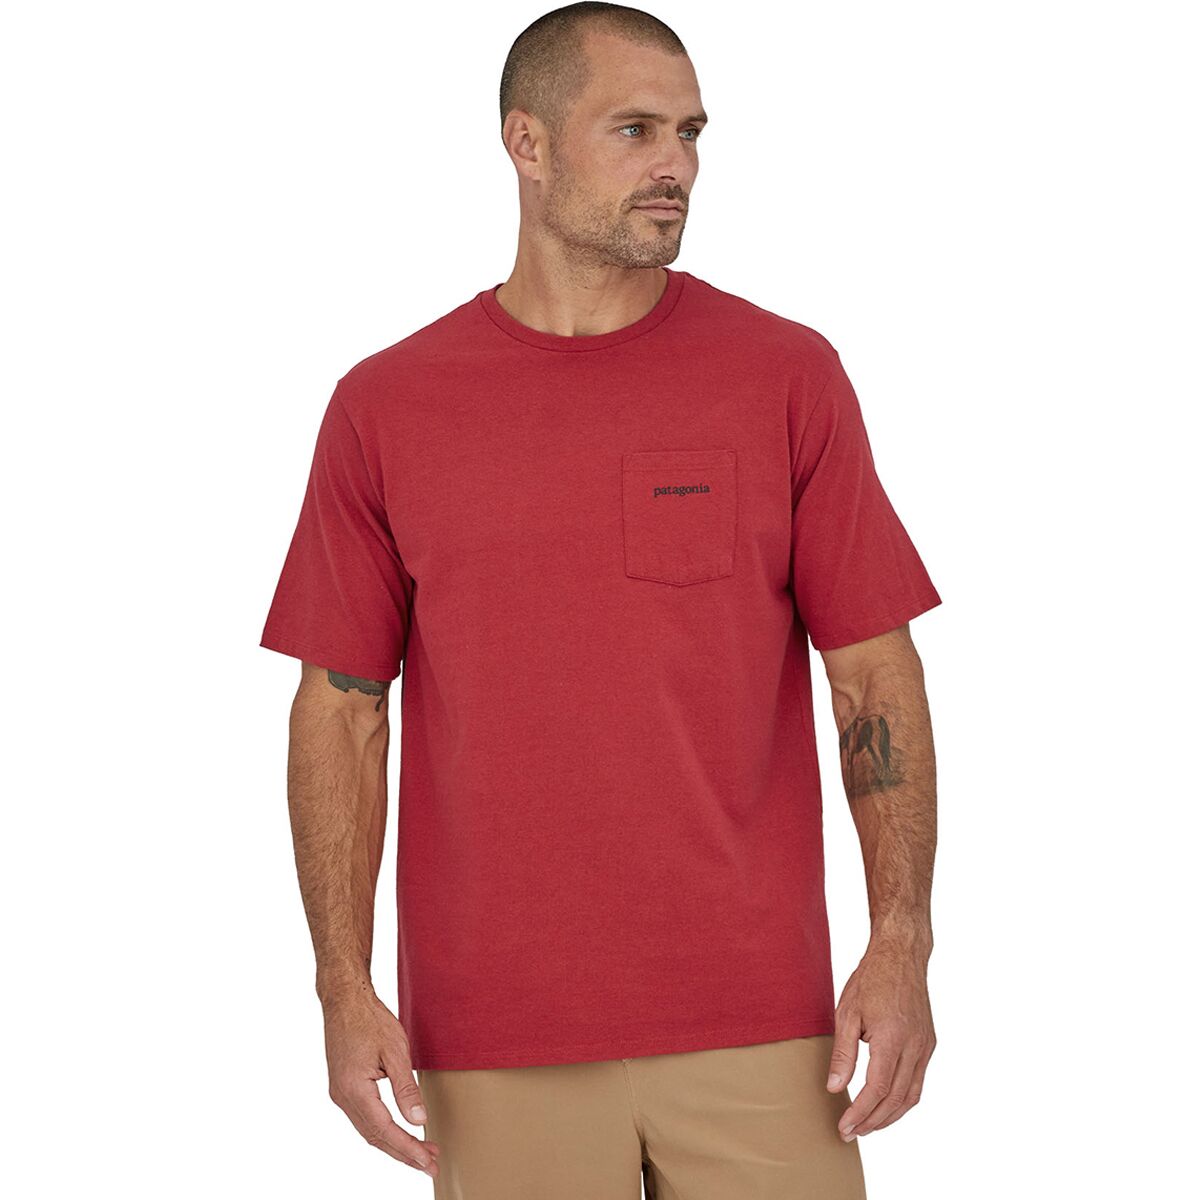 Patagonia Men's Fly Lines Responsibili-Tee Short Sleeved T-Shirt - Roots Red